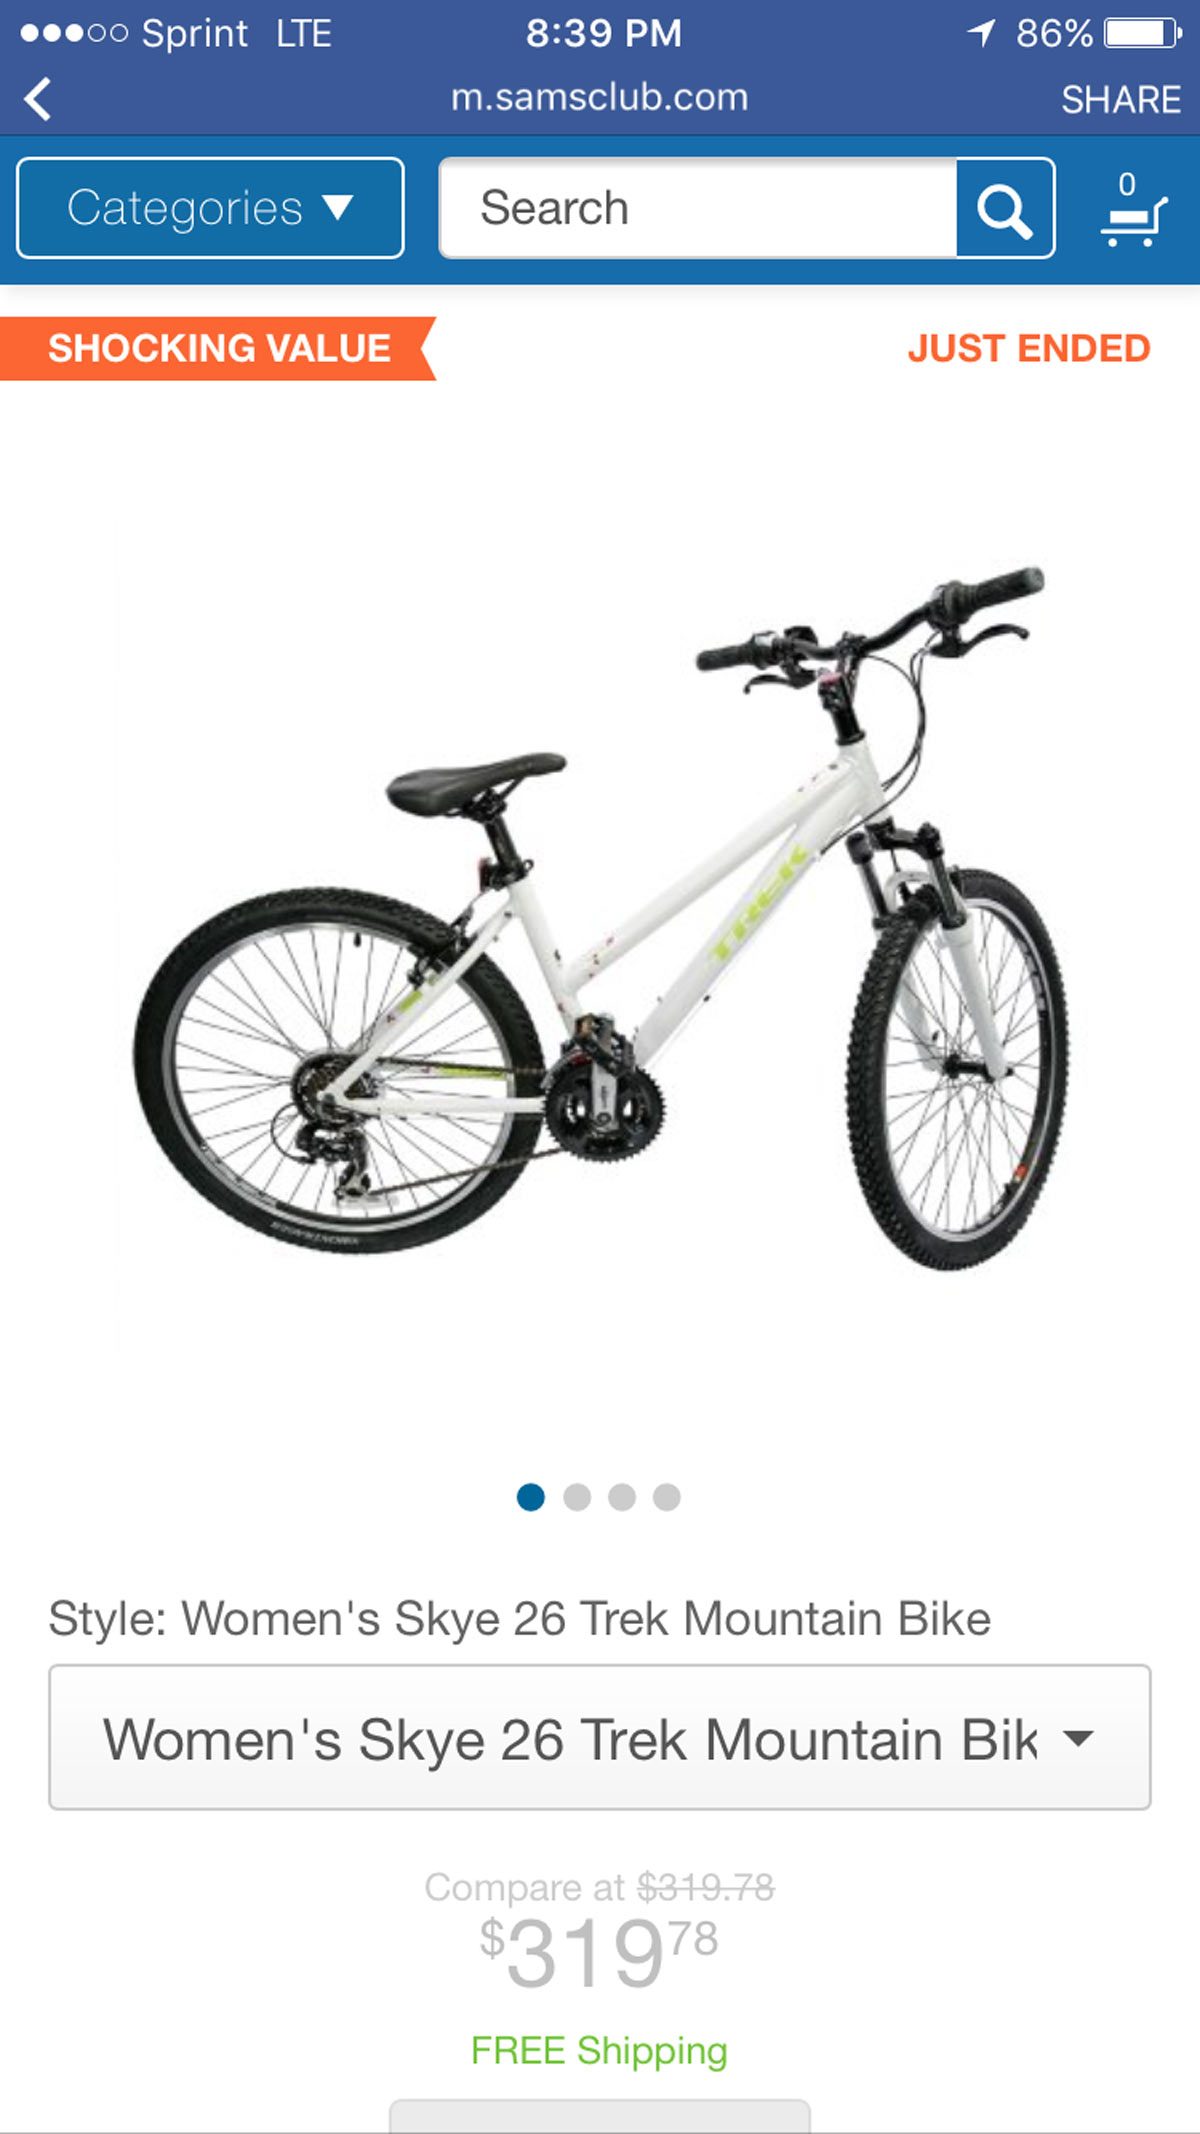 After bikes show up for sale at Sams Club, Trek says Not so fast